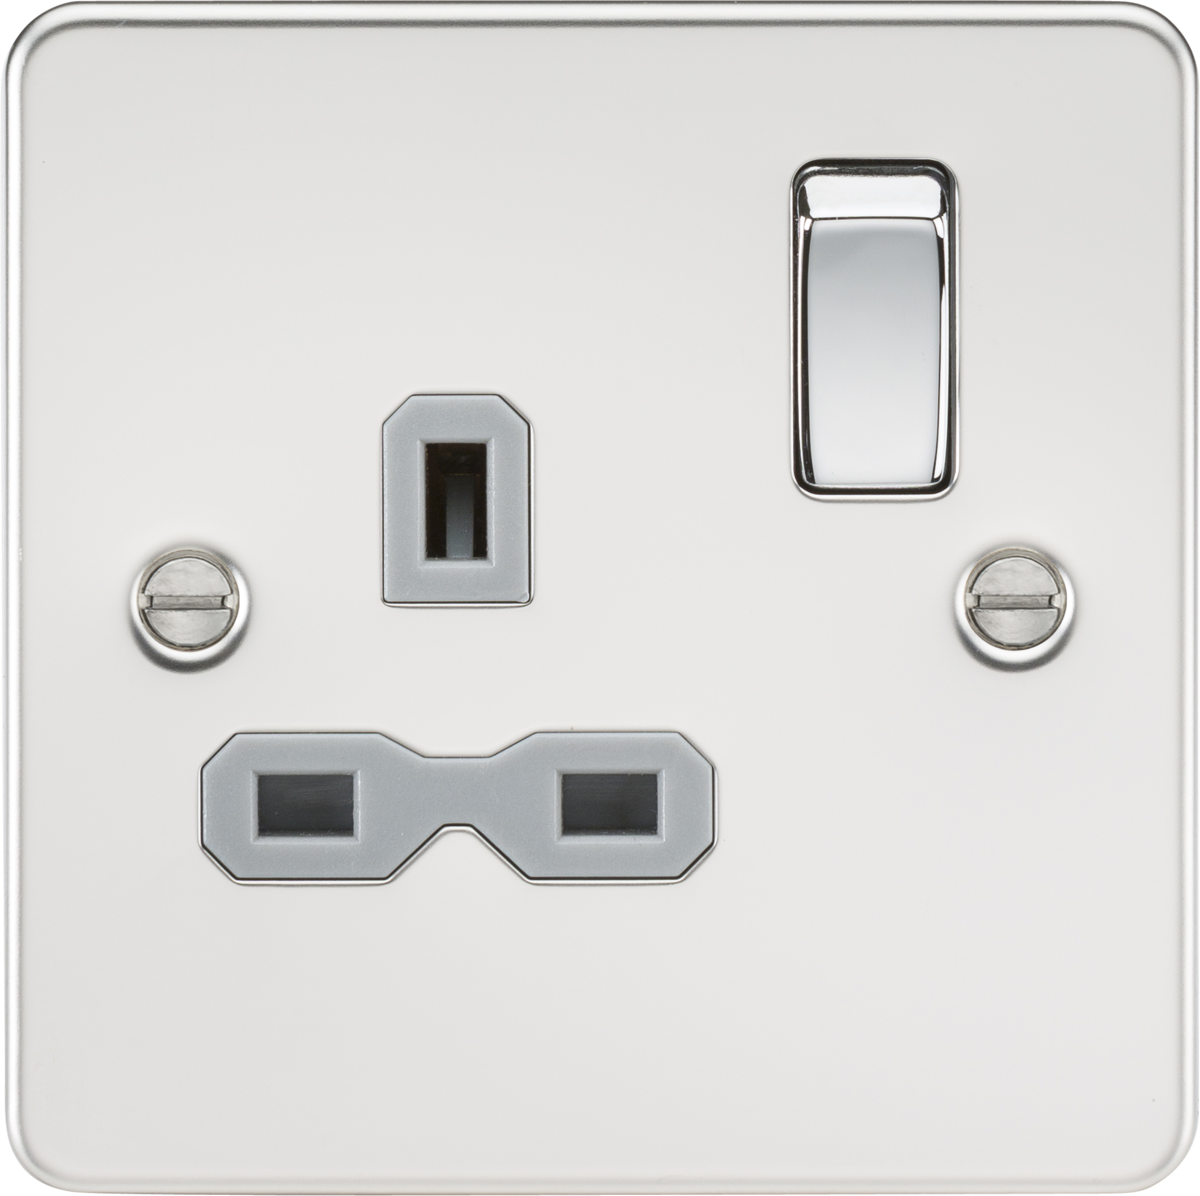 Flat plate 13A 1G DP switched socket - polished chrome with grey insert